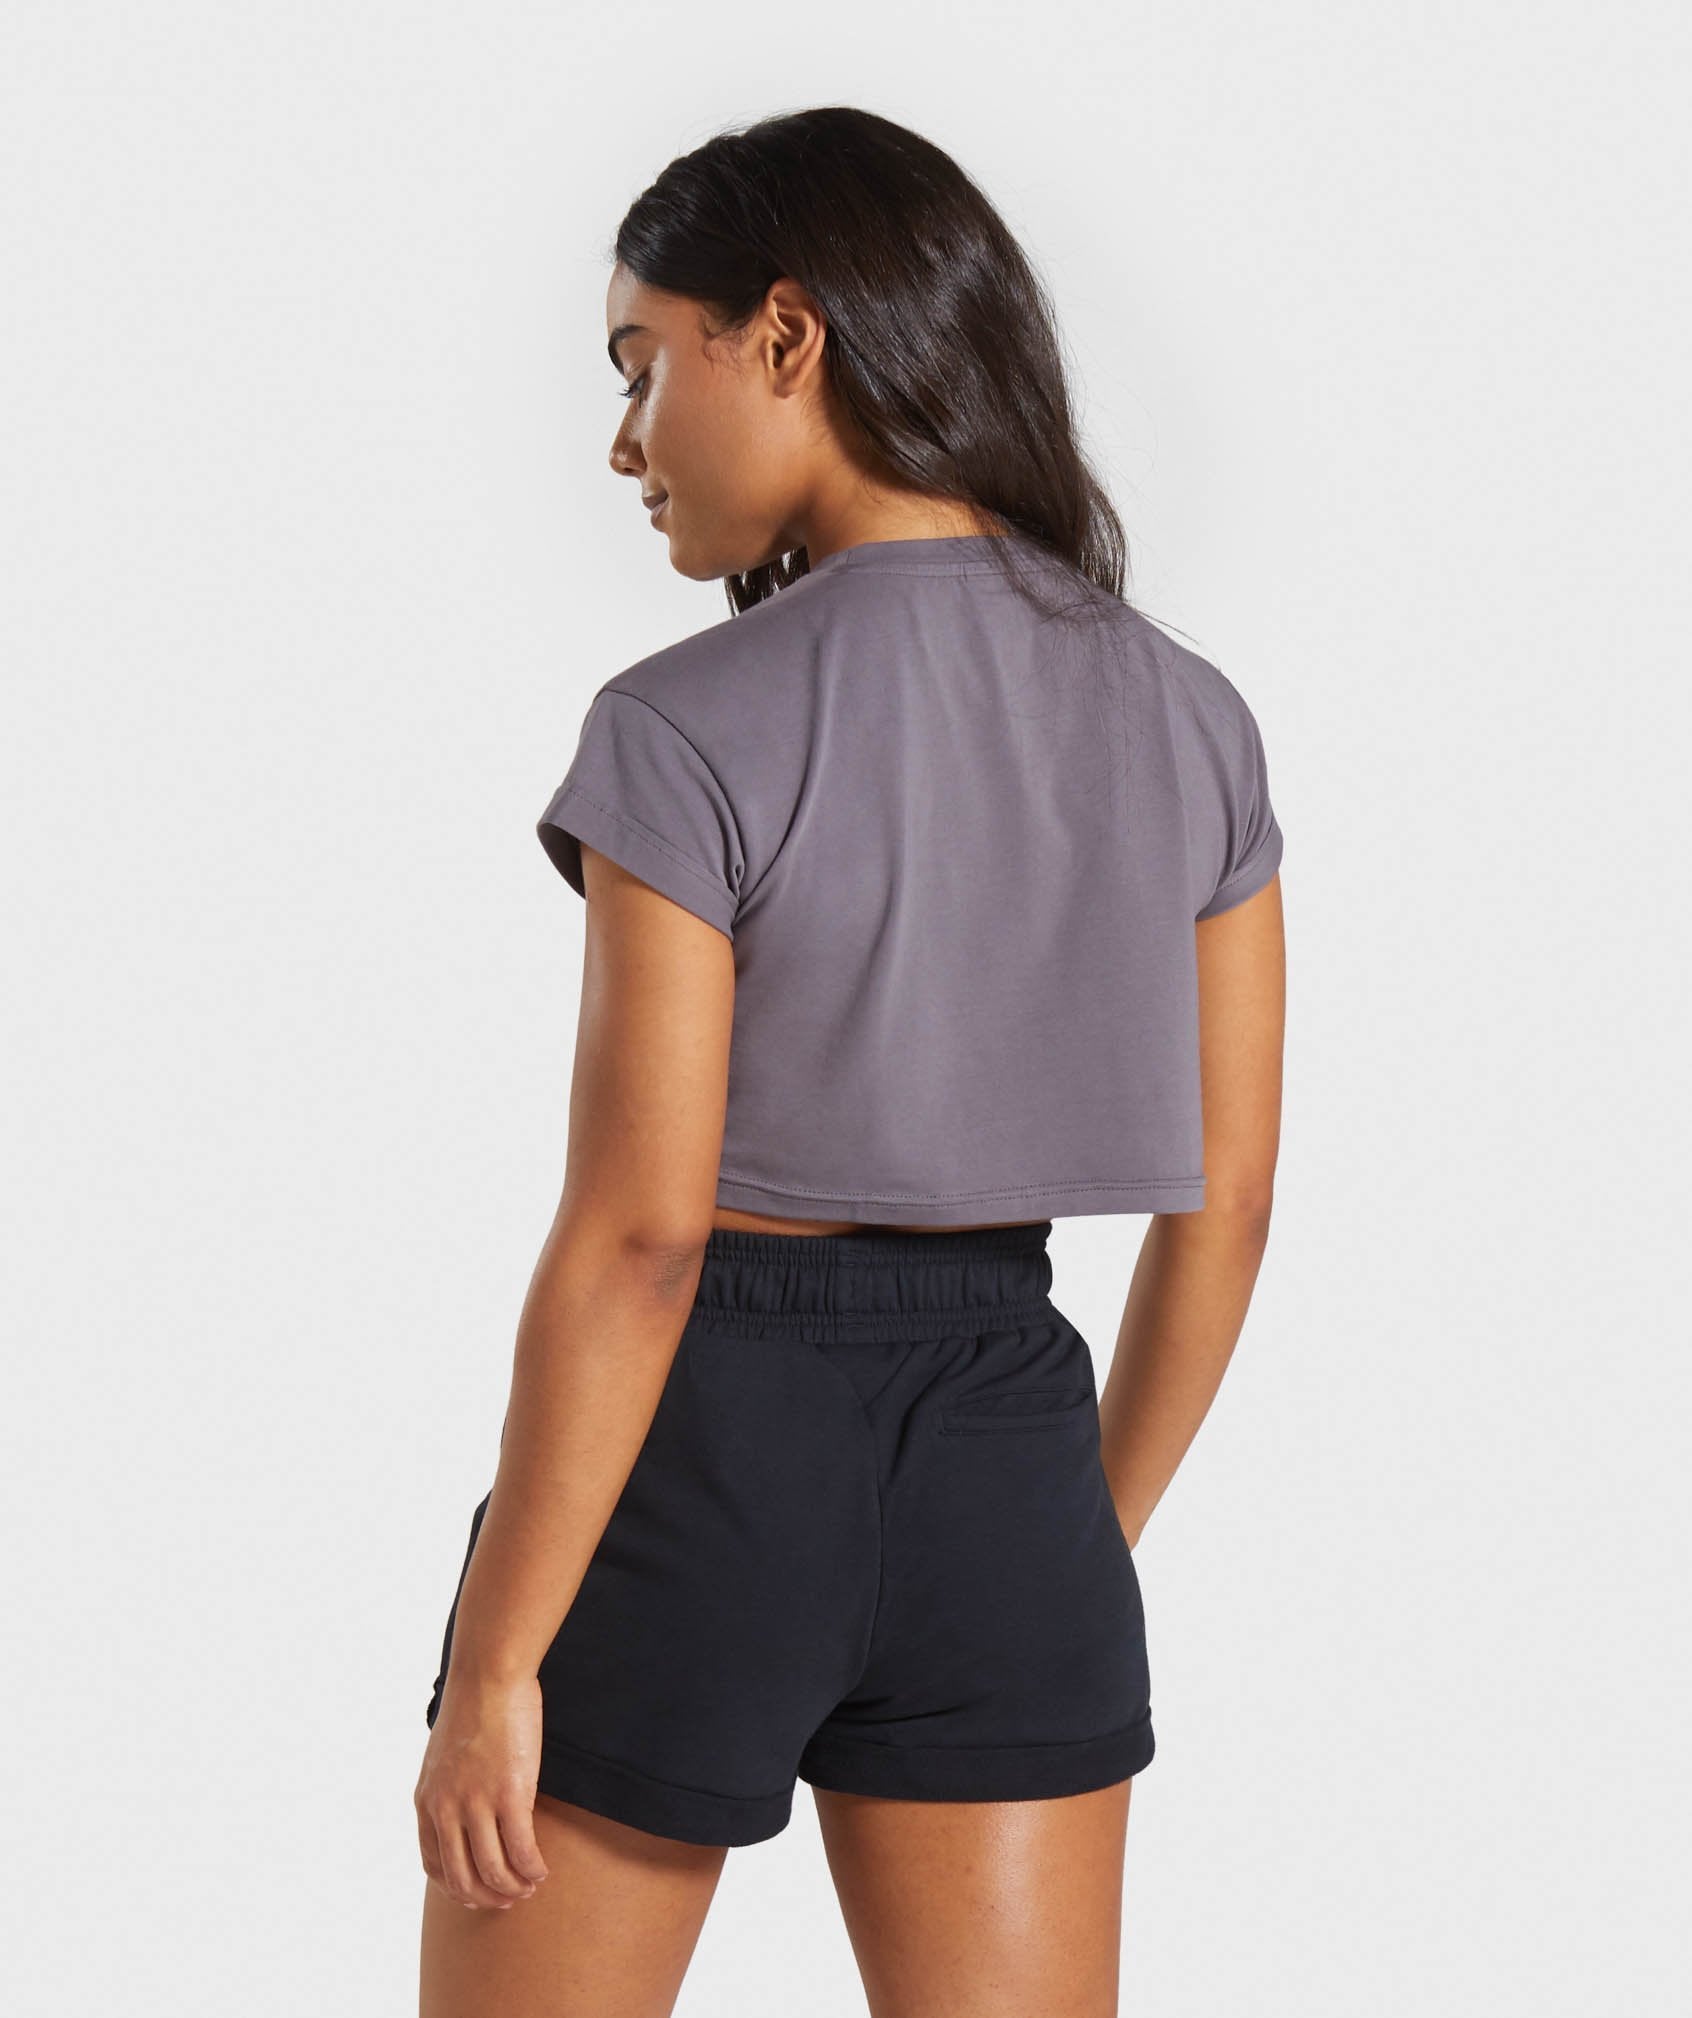 Fraction Crop Top in Slate Lavender - view 2